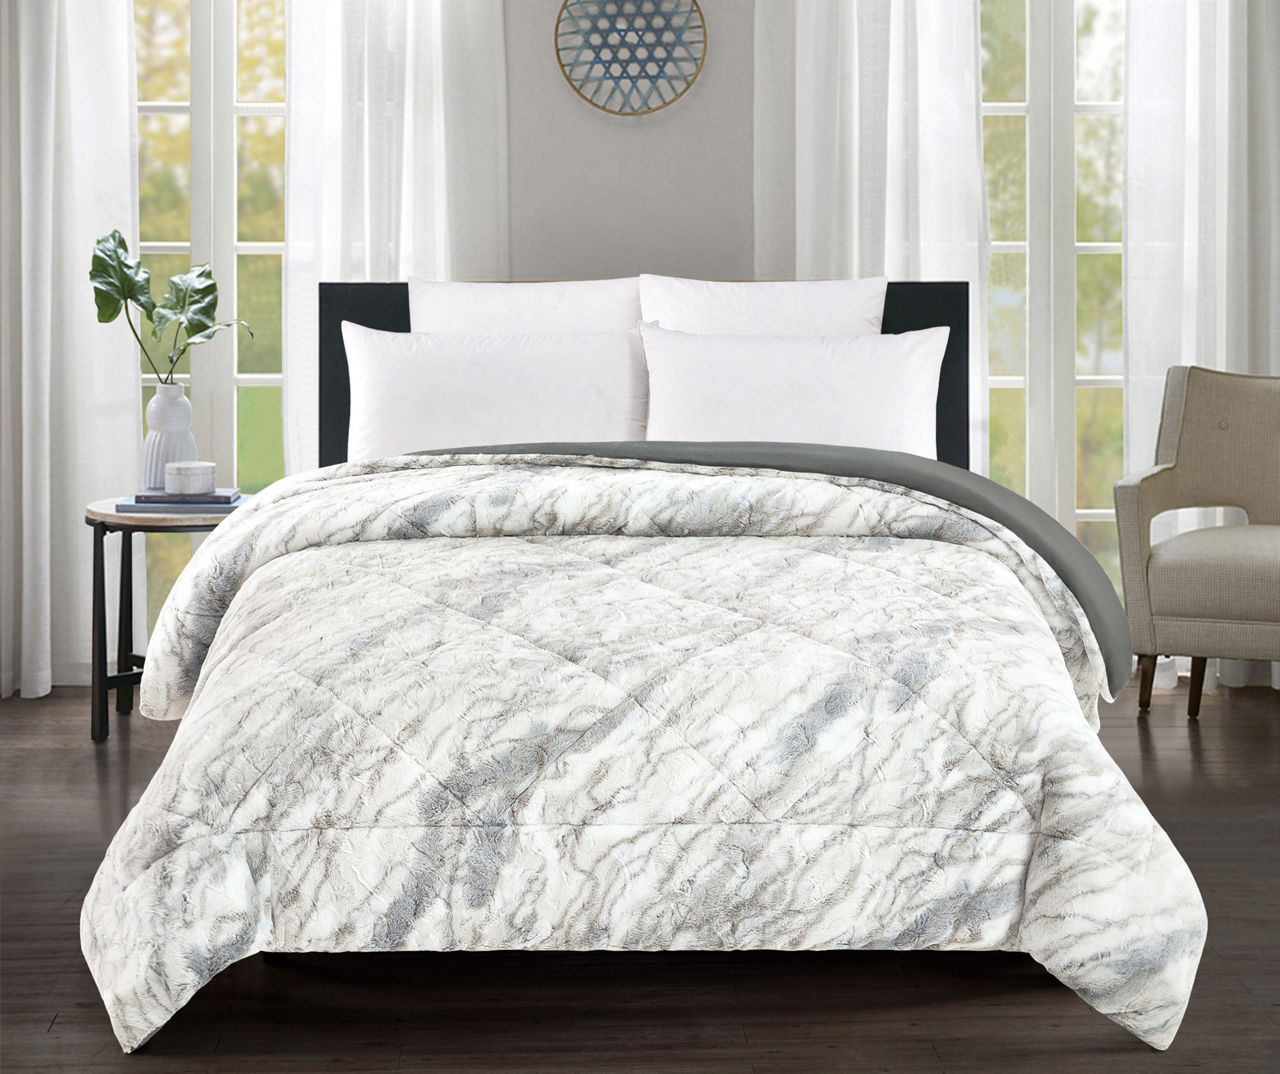 Jigsaw Patterned Oversized White 3-piece Queen King Bedspread Coverlet Set 